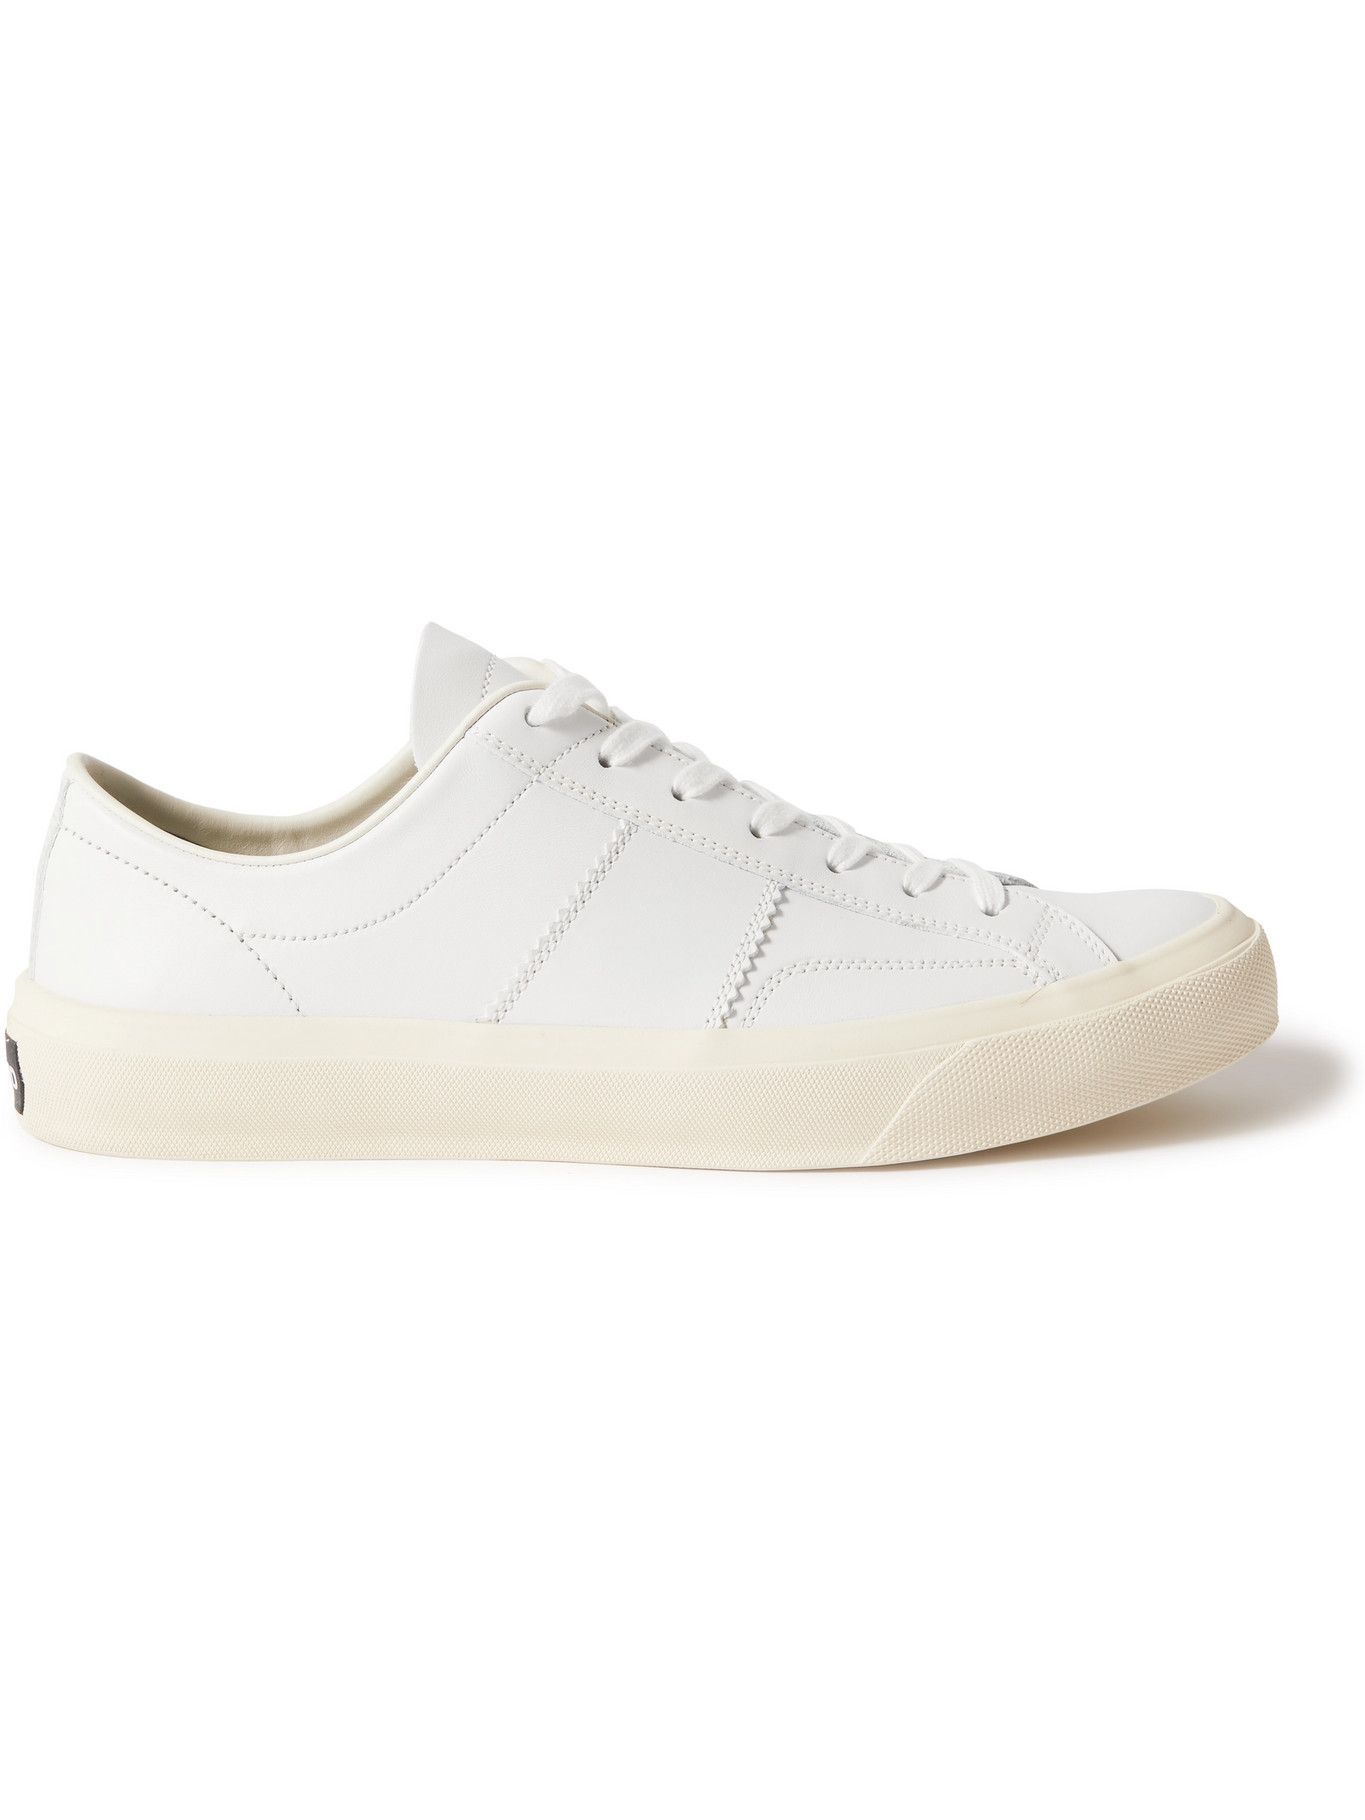 TOM FORD - Cambridge Leather Sneakers - White TOM FORD